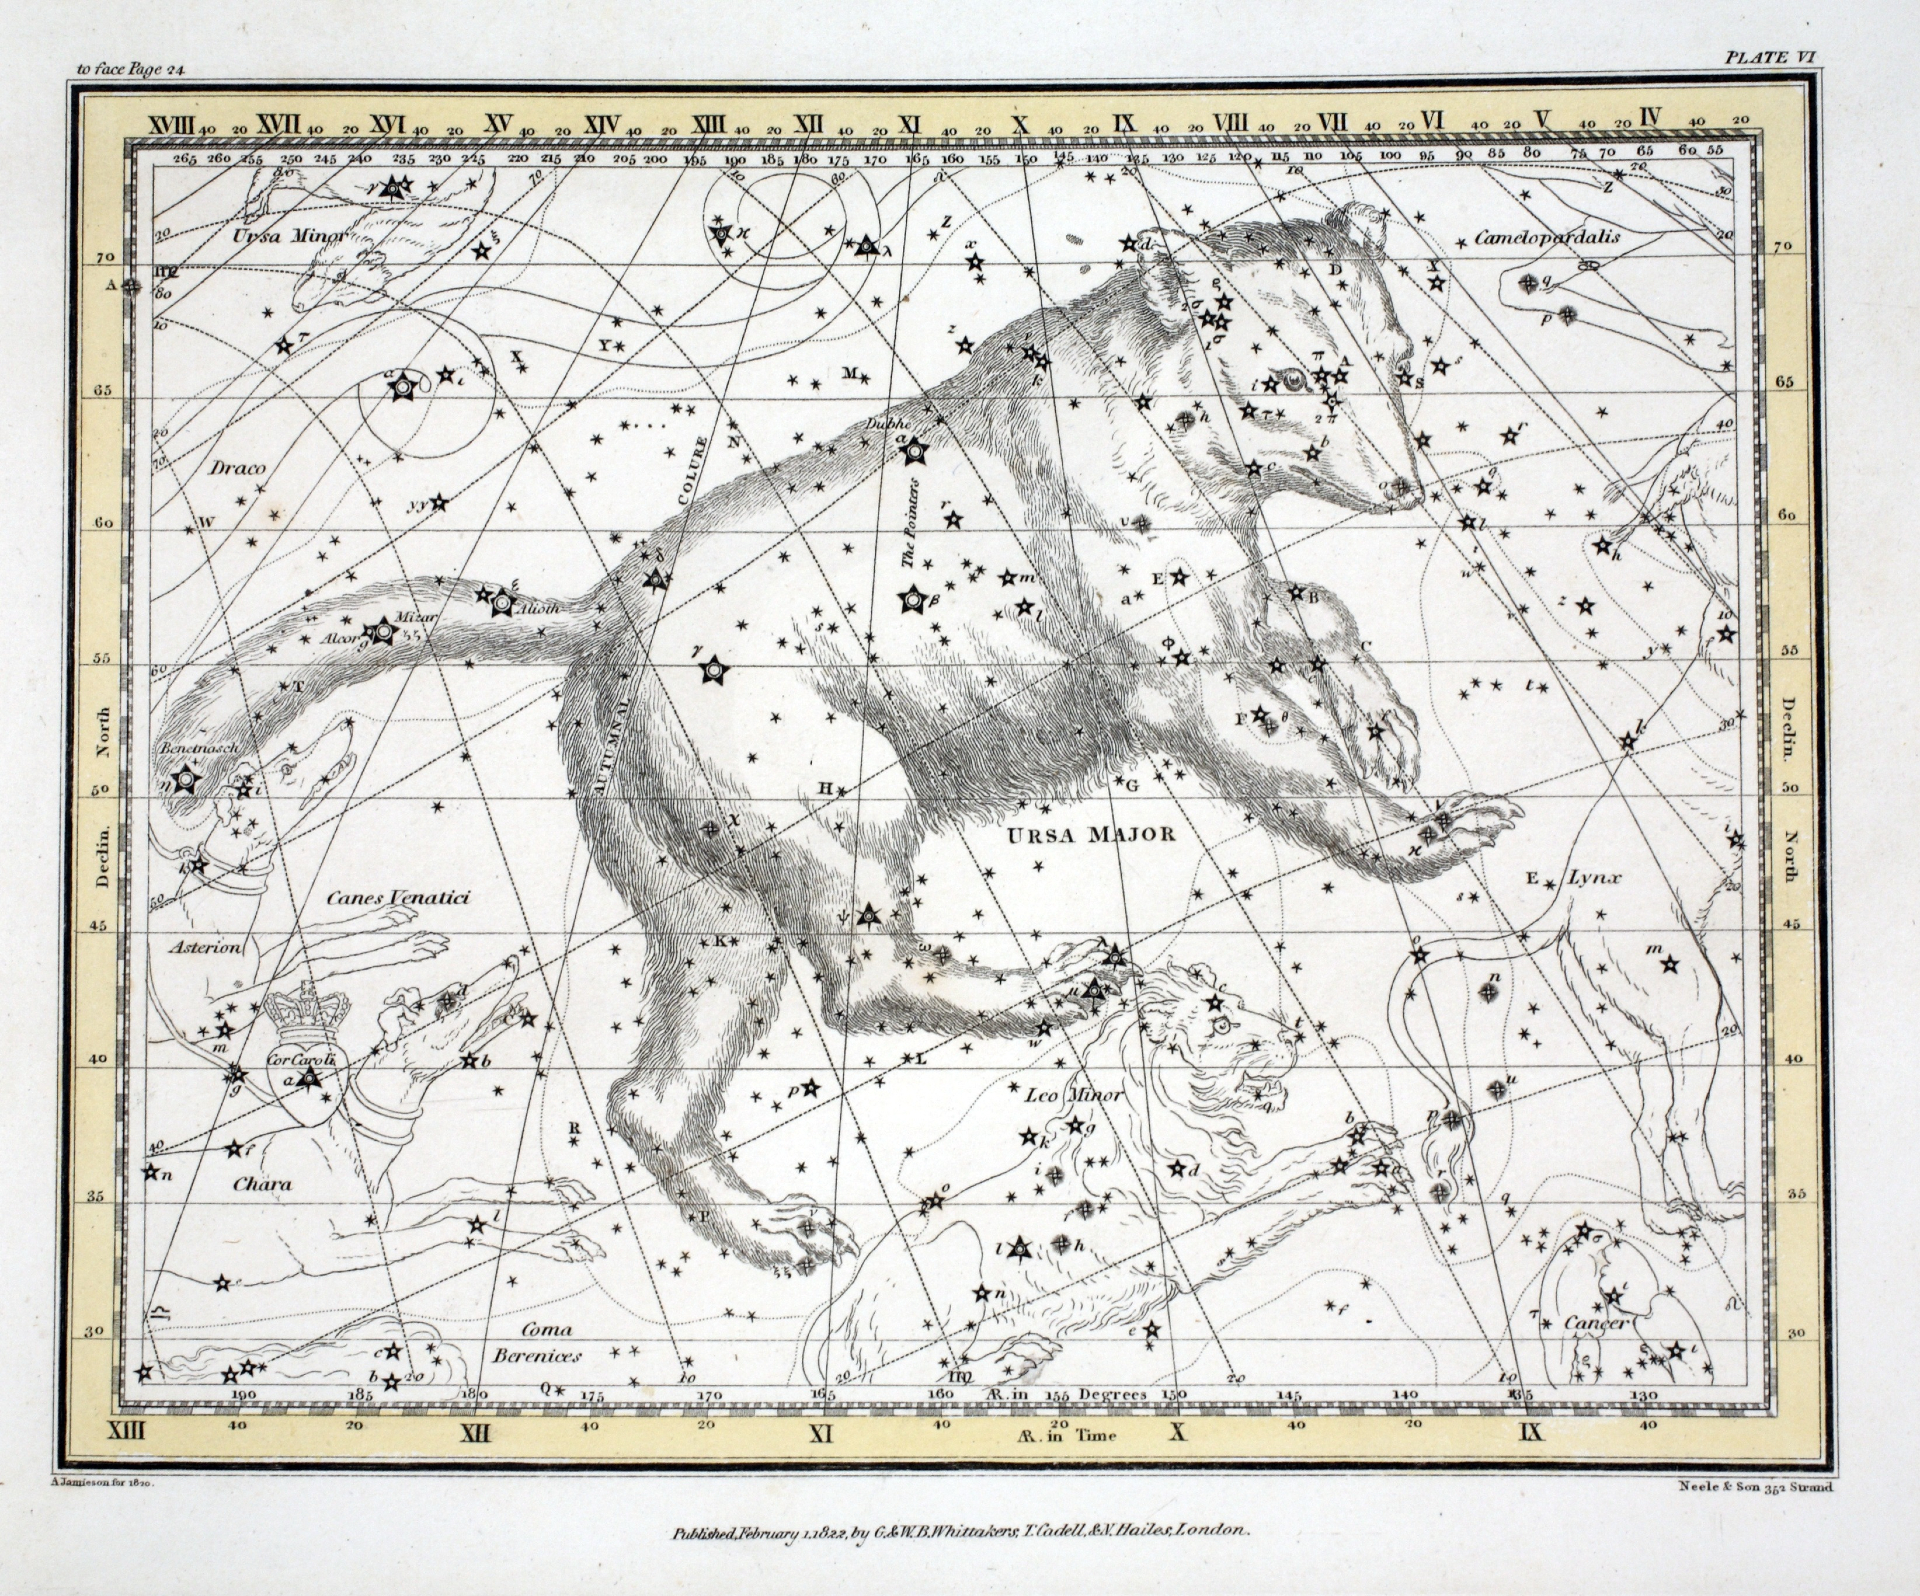 Ursa Major stars labelled and the overlay of the Great Bear surrounds the celestial scene.